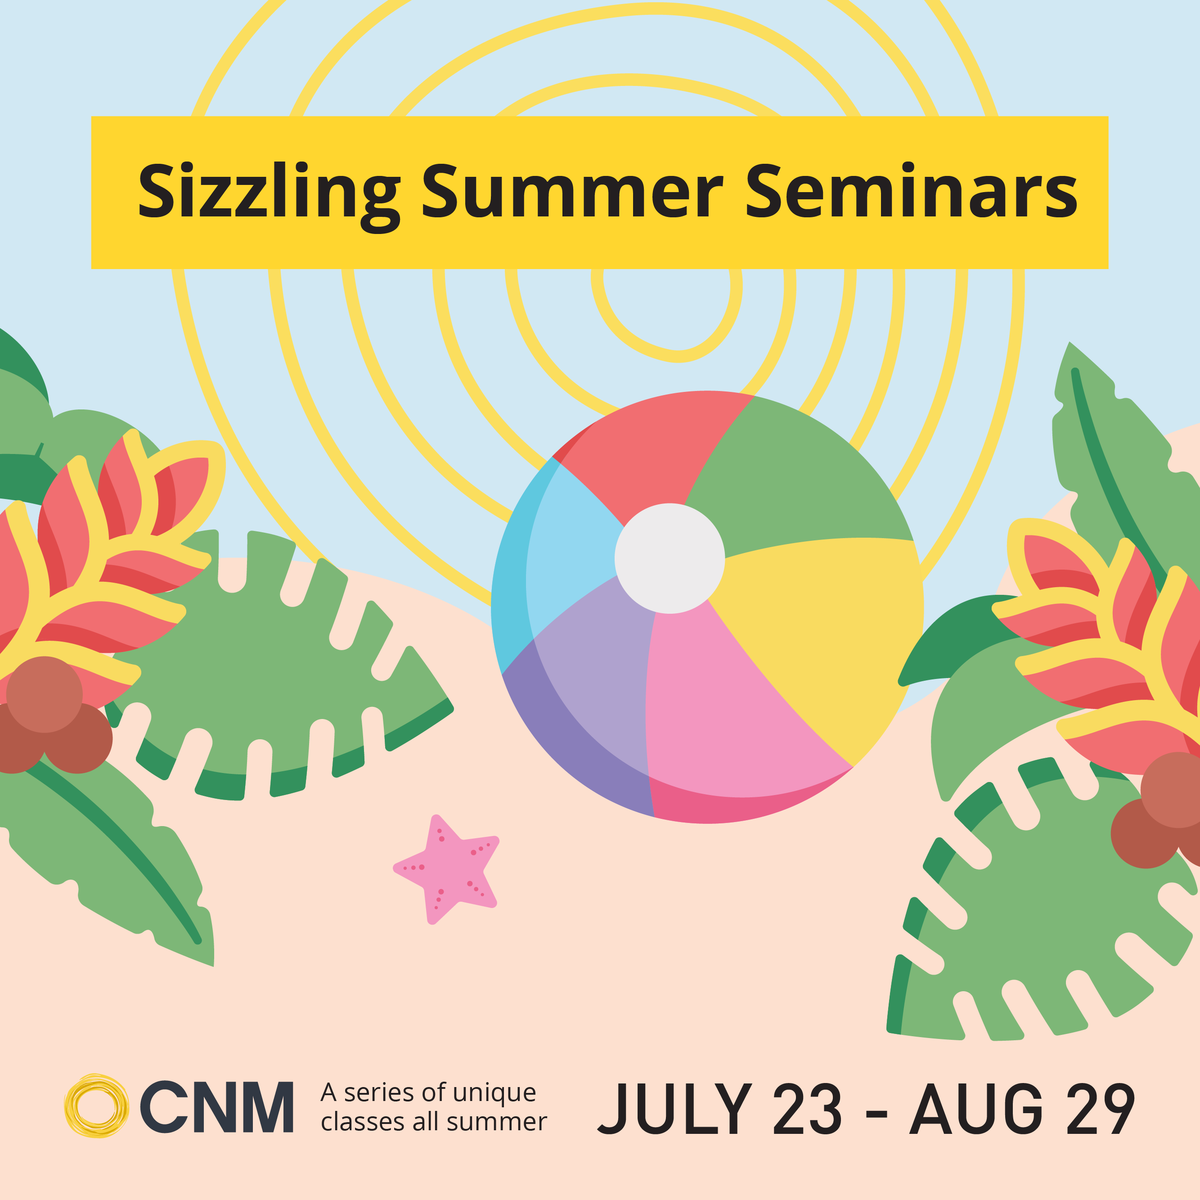 CNM Sizzling Summer Seminars Digital AD by Diane Lindquist on Dribbble